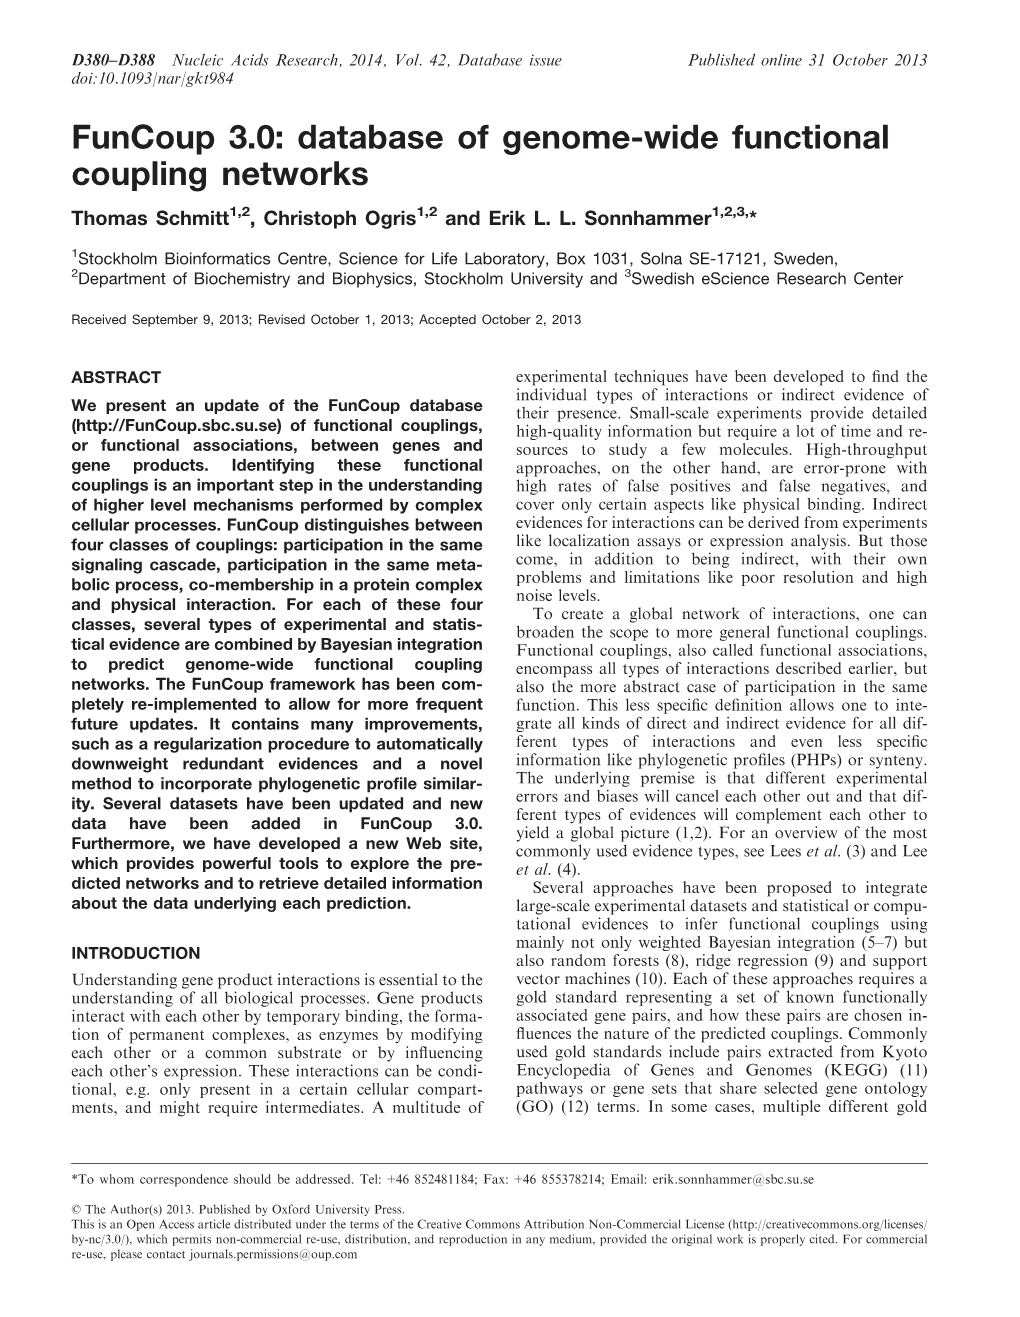 Funcoup 3.0: Database of Genome-Wide Functional Coupling Networks Thomas Schmitt1,2, Christoph Ogris1,2 and Erik L